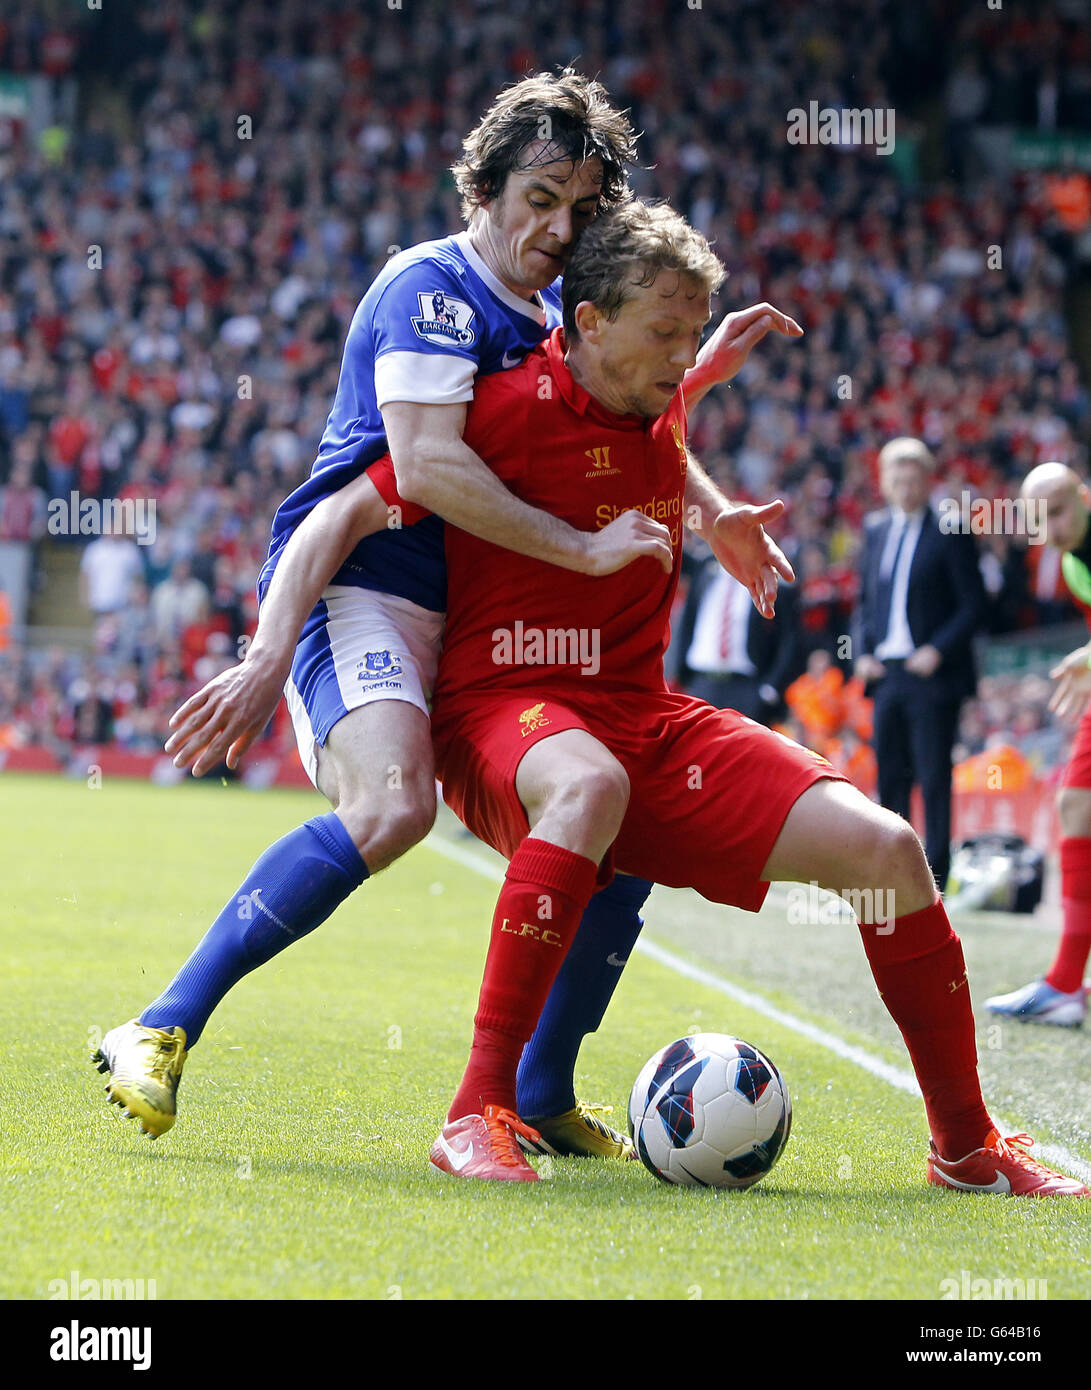 Soccer - Barclays Premier League - Liverpool v Everton - Anfield. Liverpool's Lucas Leiva and Everton's Leighton Baines (left) battle for the ball Stock Photo